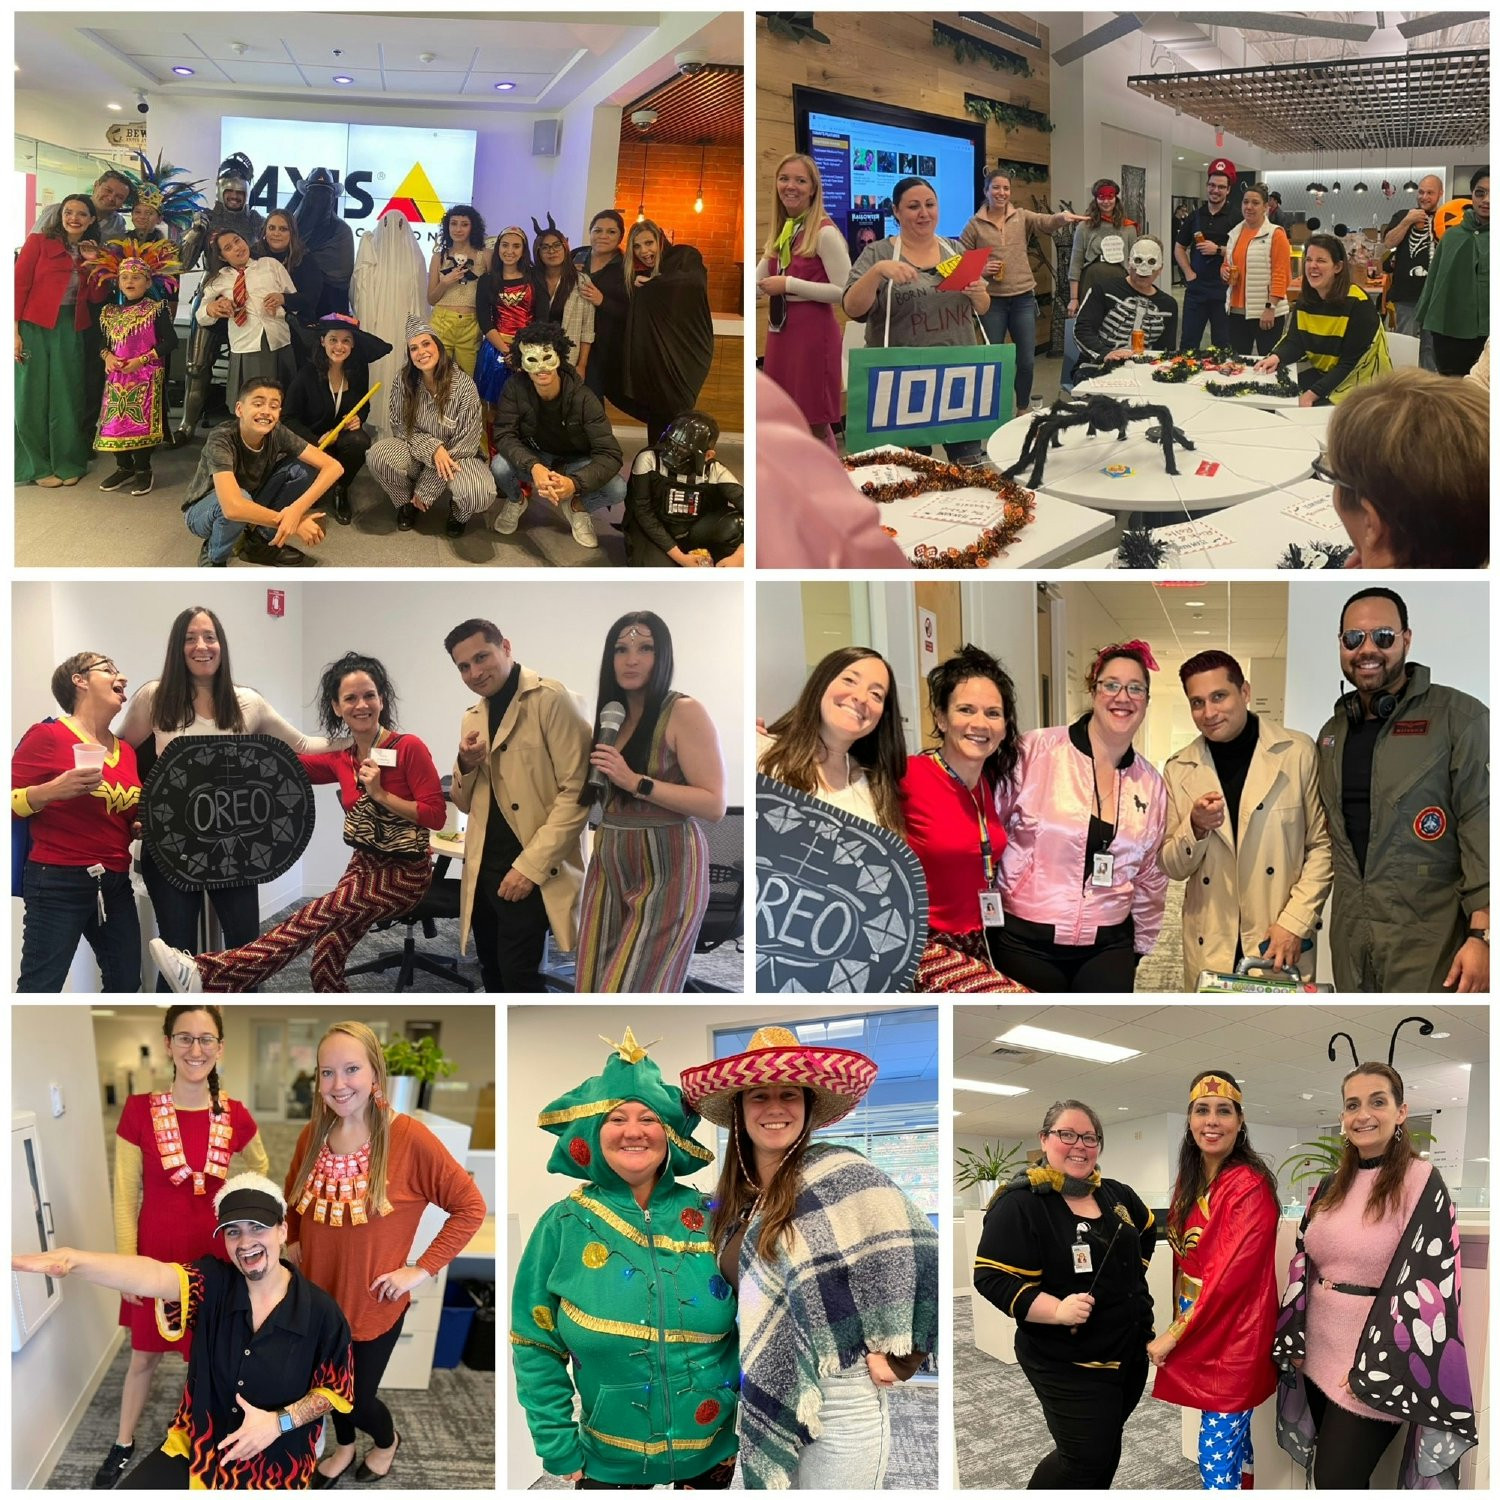 Halloween is one of our favorite holidays. We have a big party and everyone goes all out on their costumes!